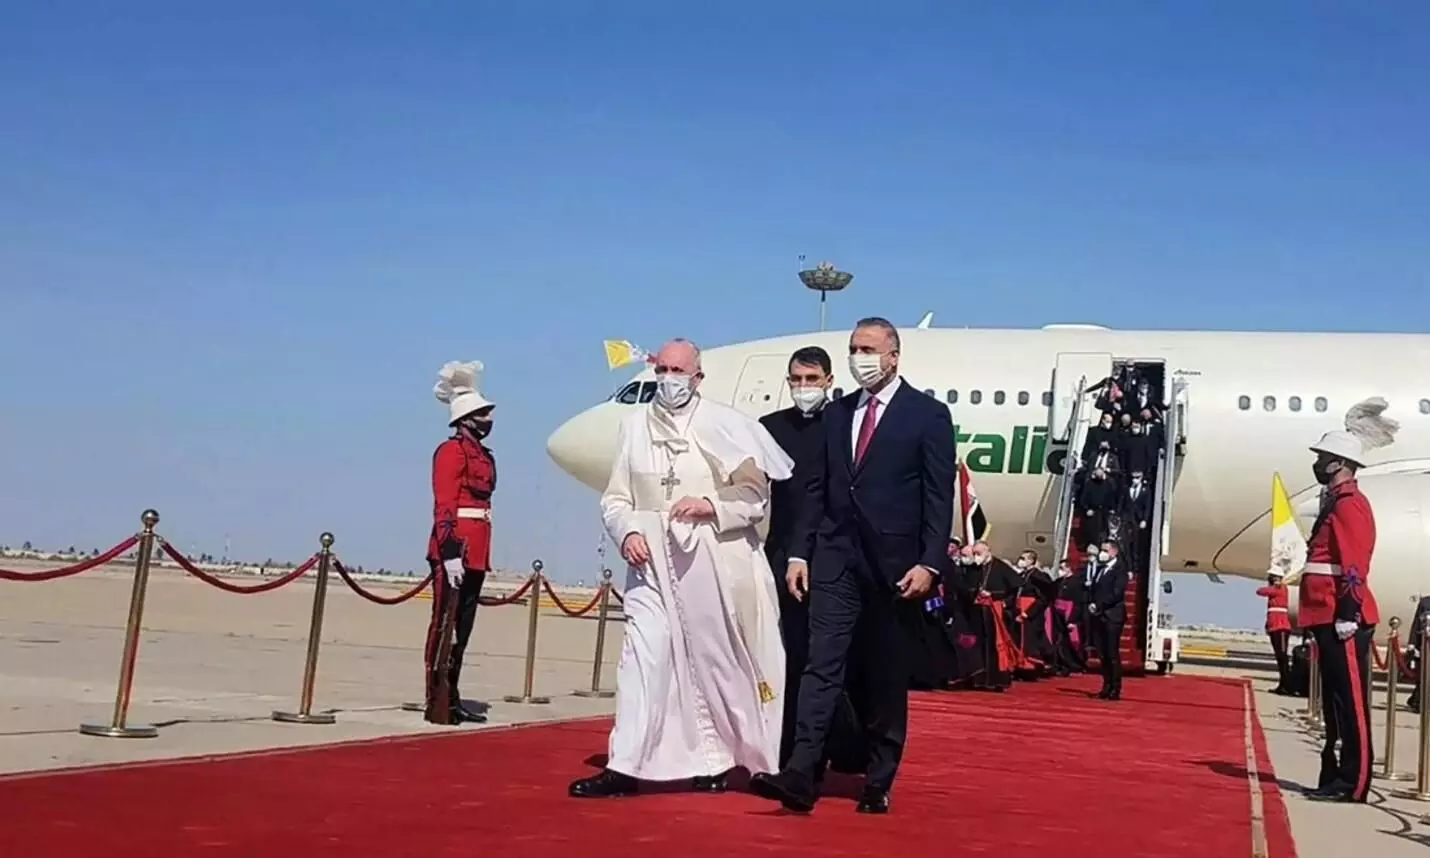 The Pope reached Baghdad